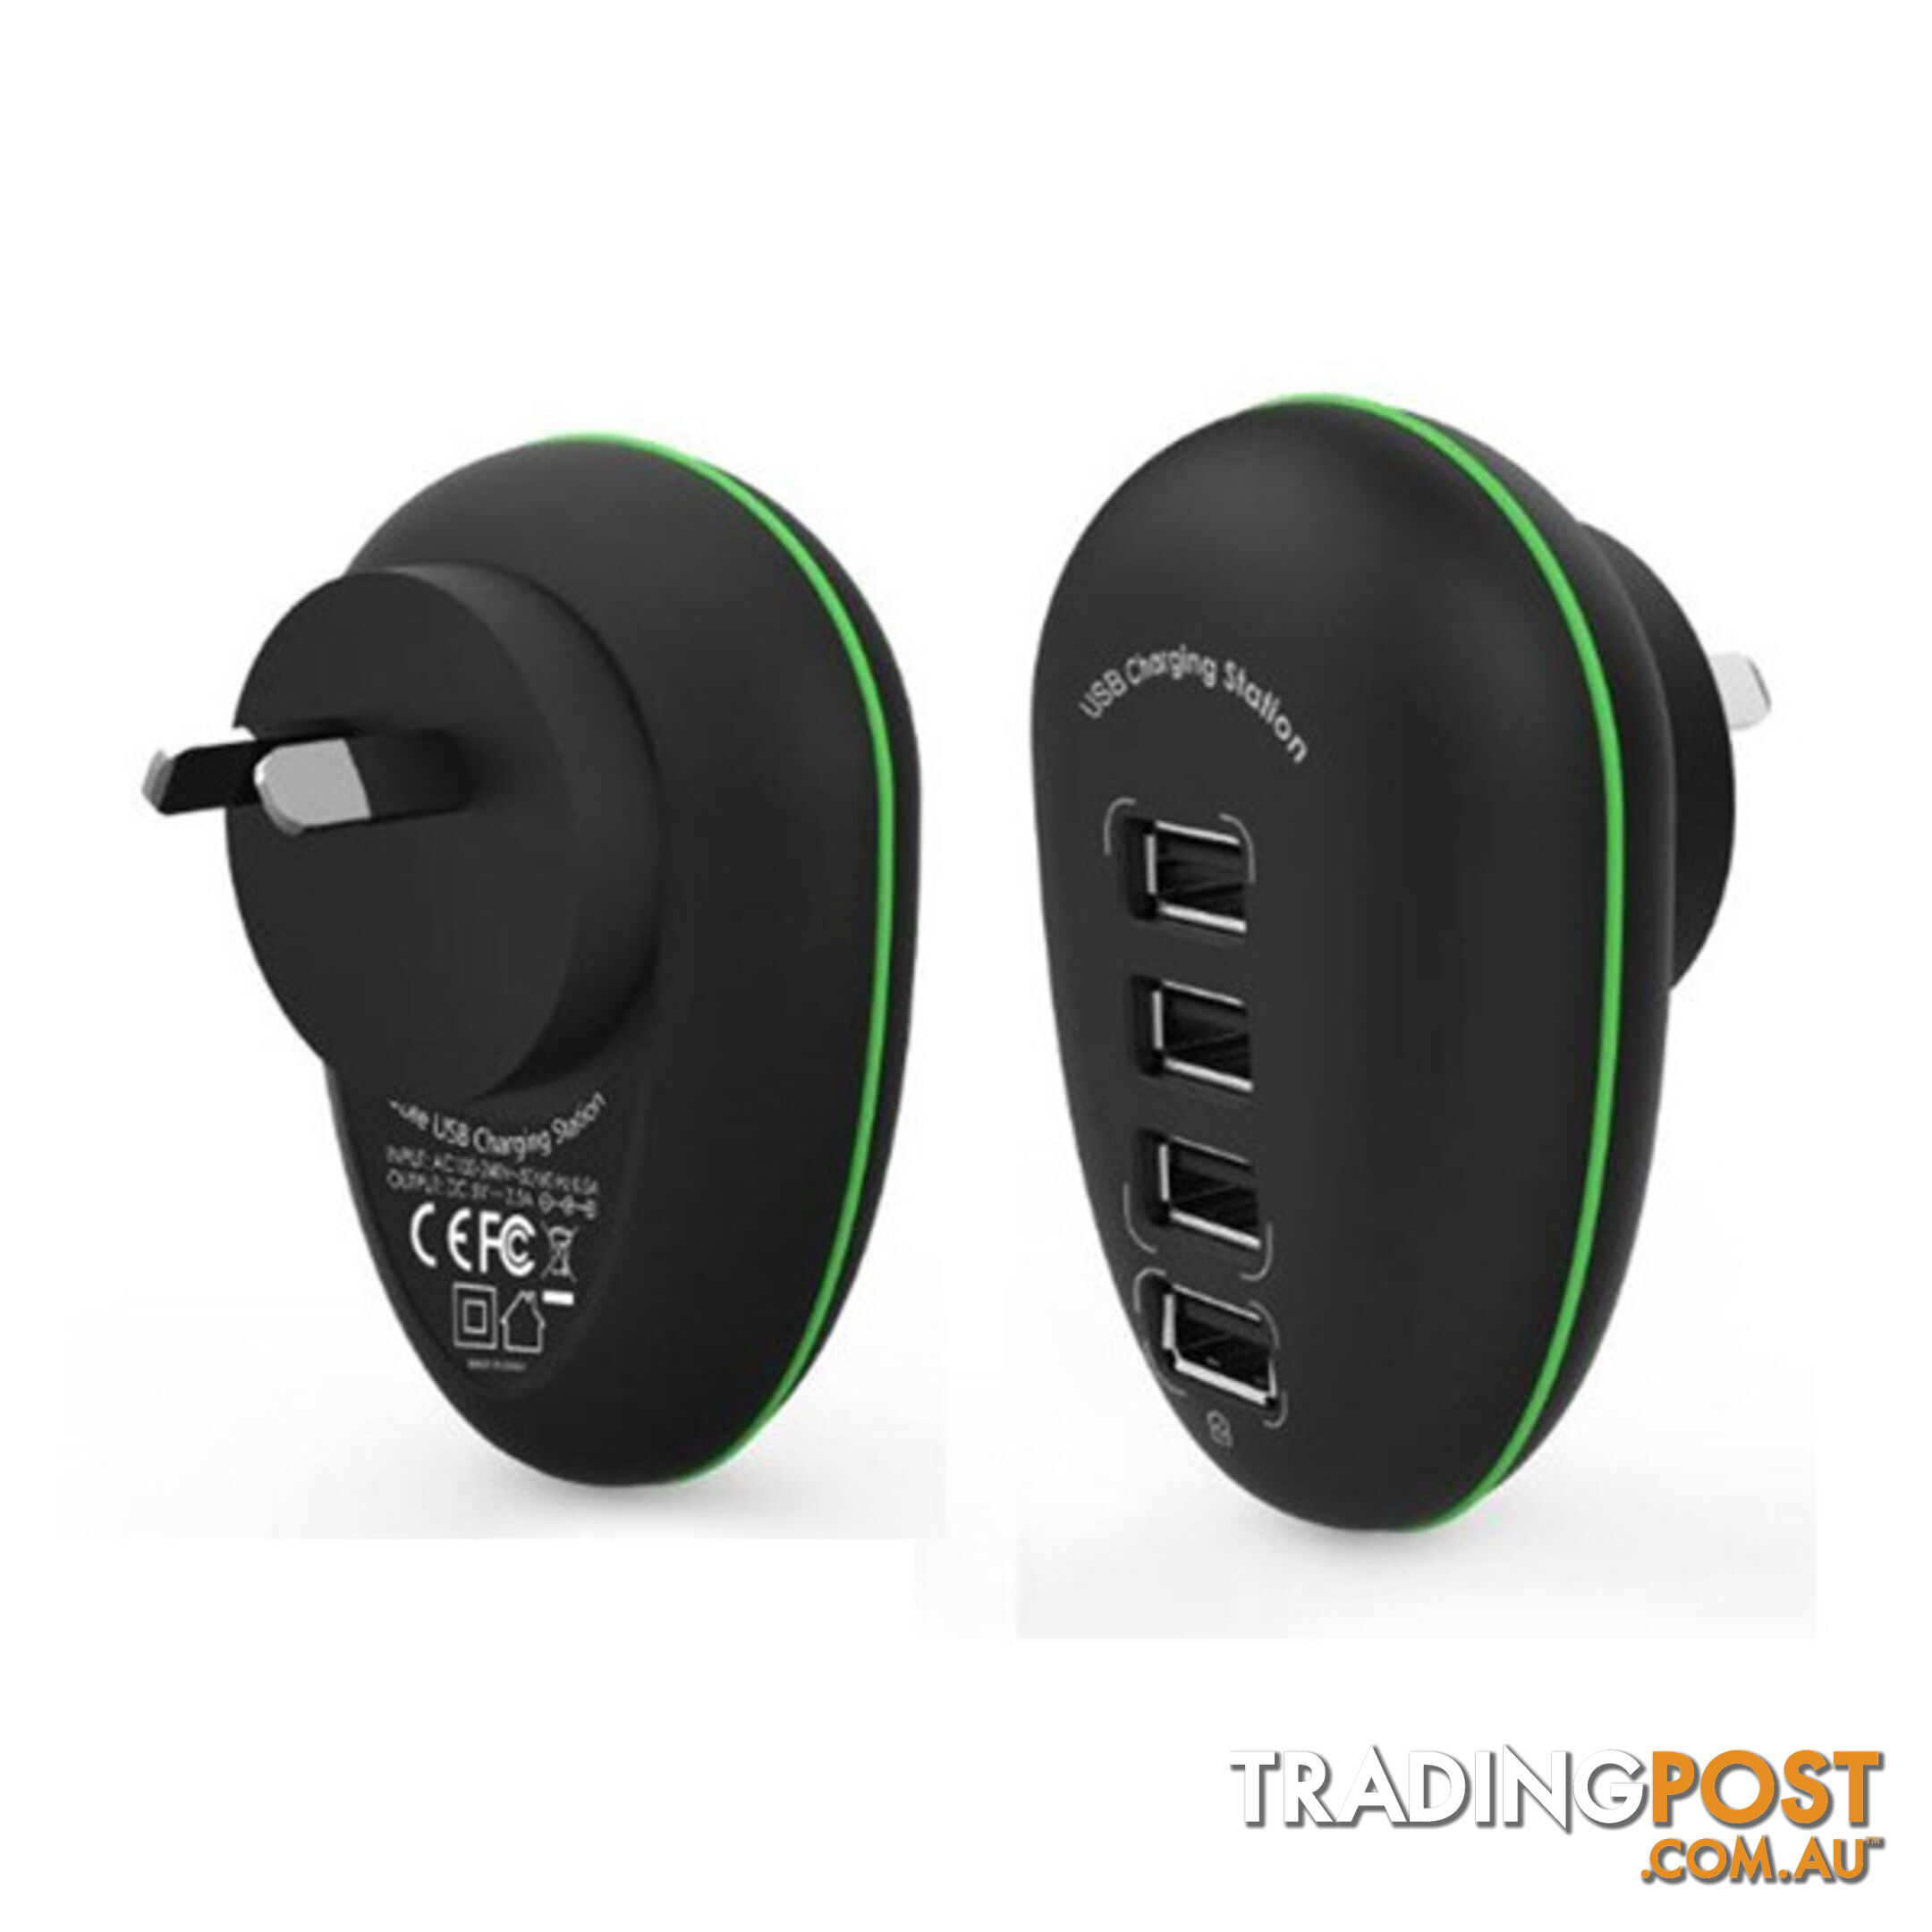 Portable 4 Port USB Charge Station including a 2.4A Fast-charging Port